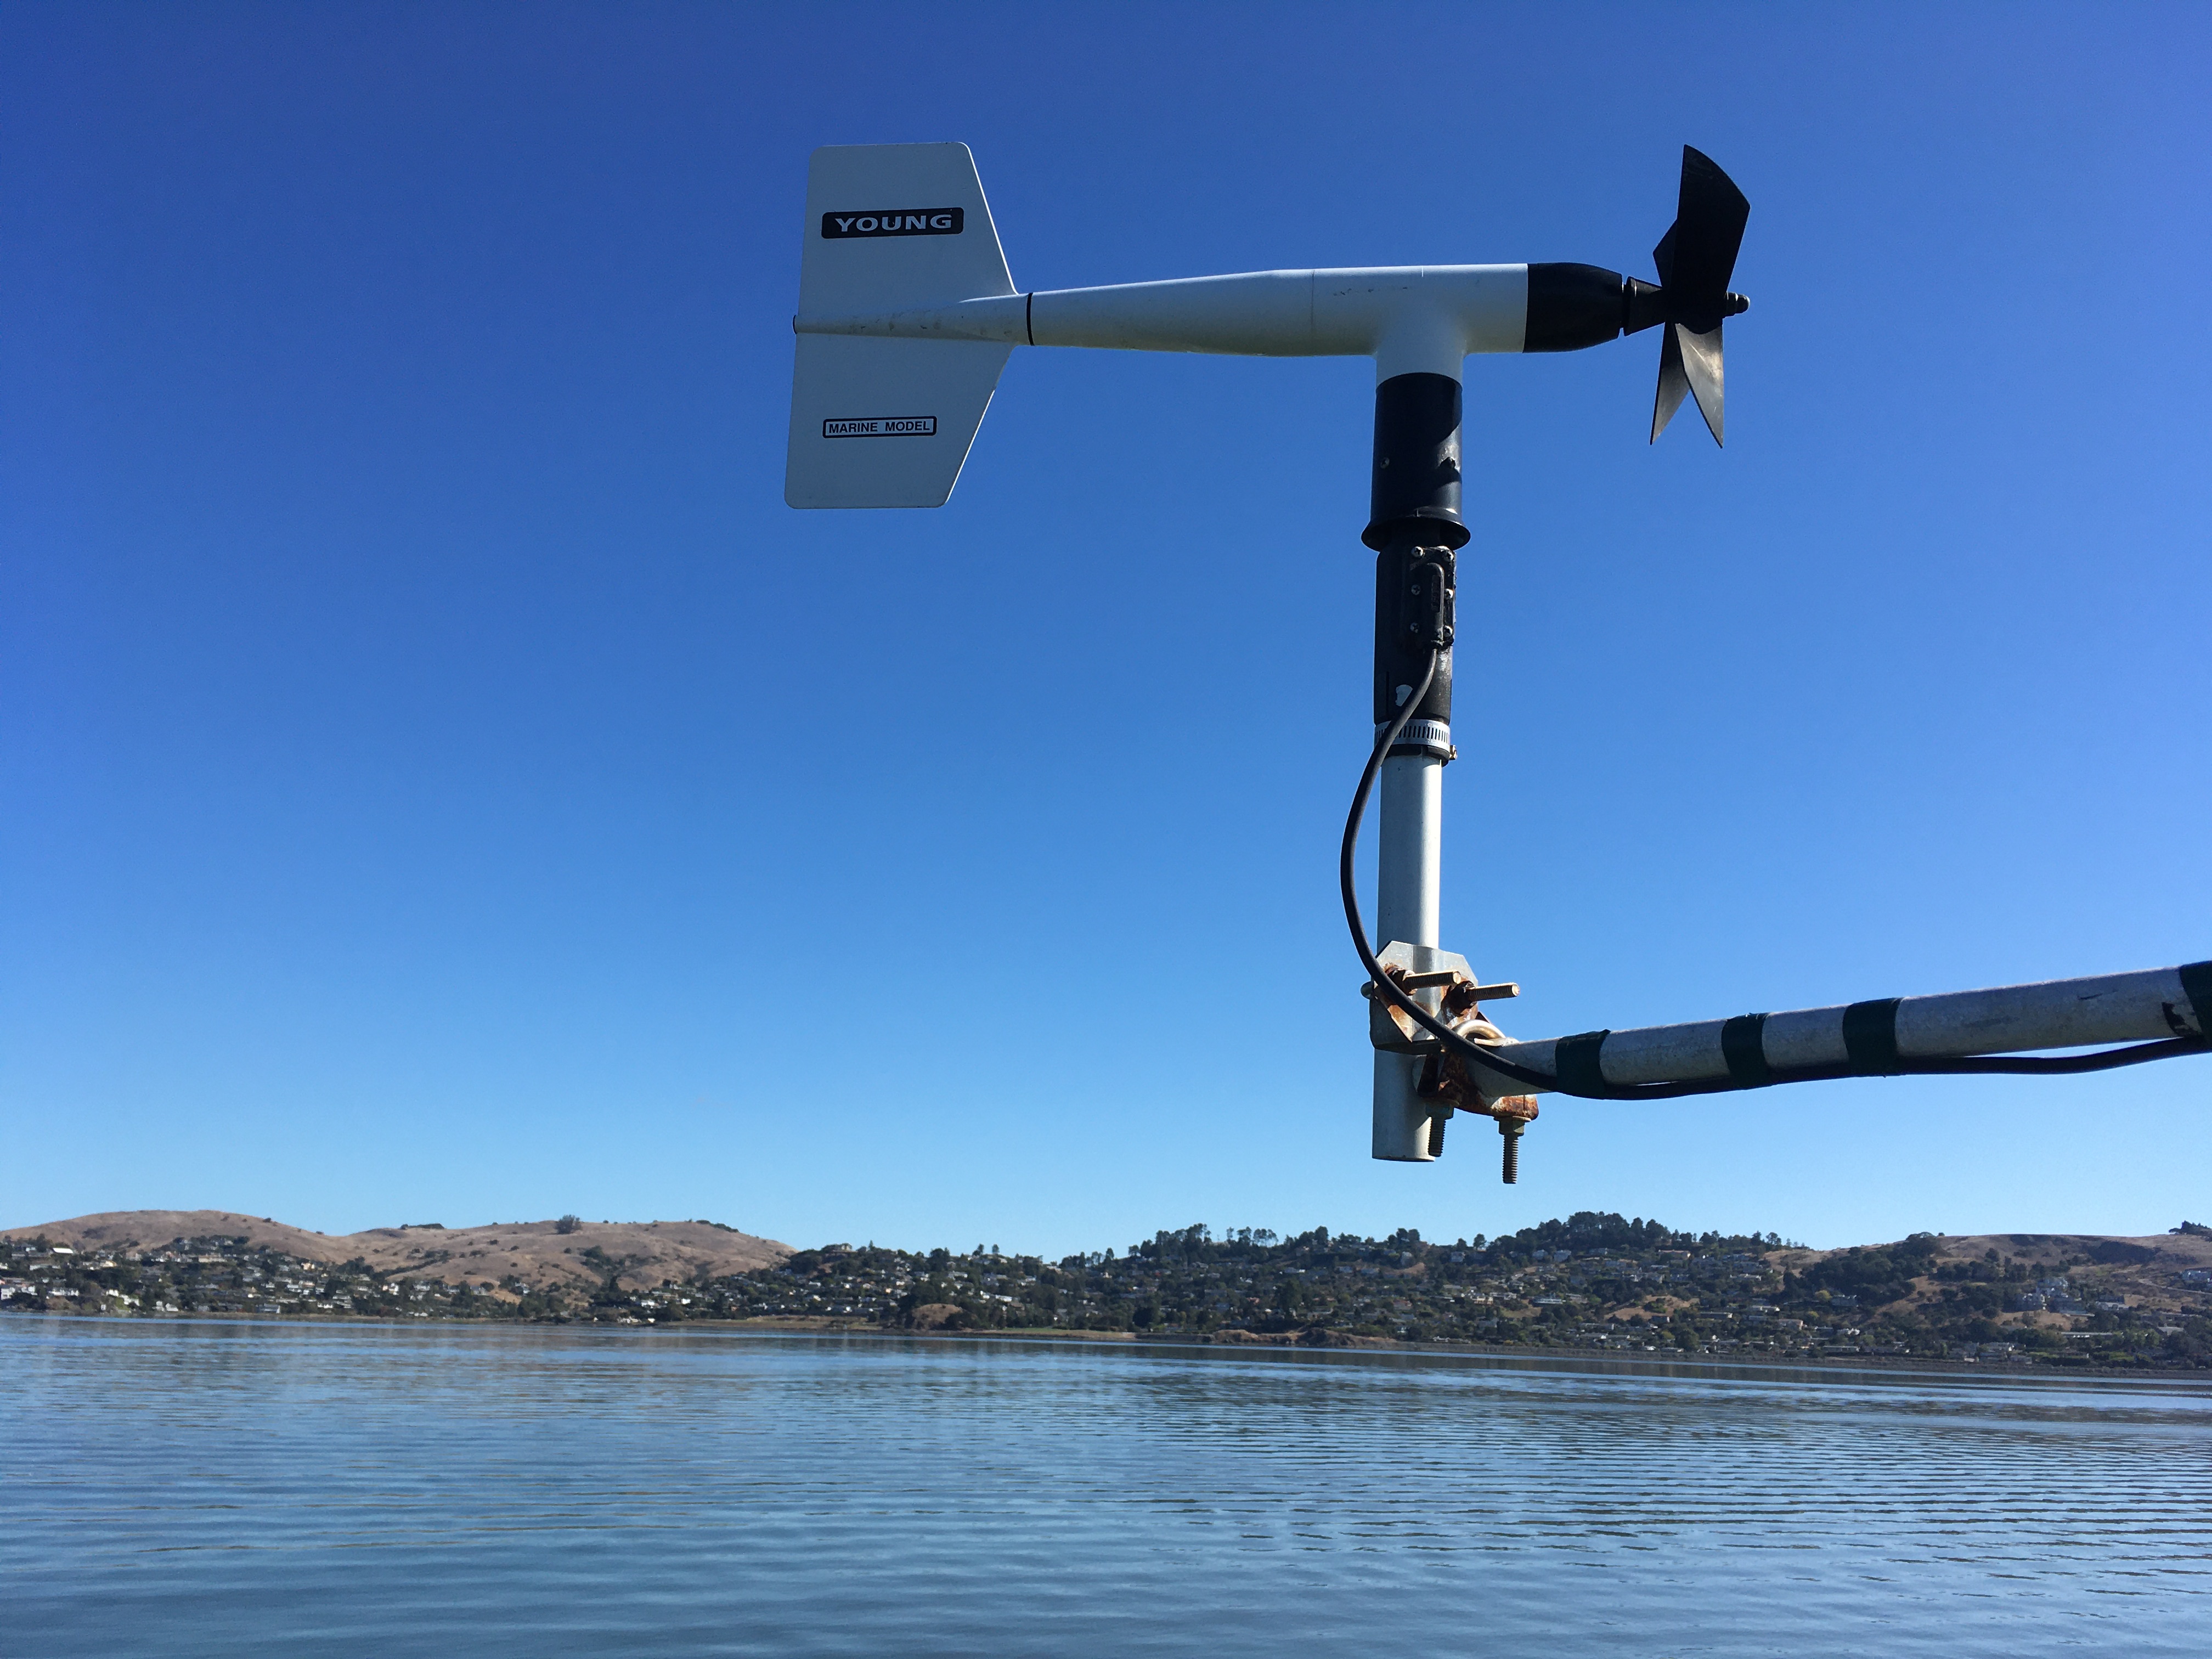 Device collecting weather parameters and wind direction